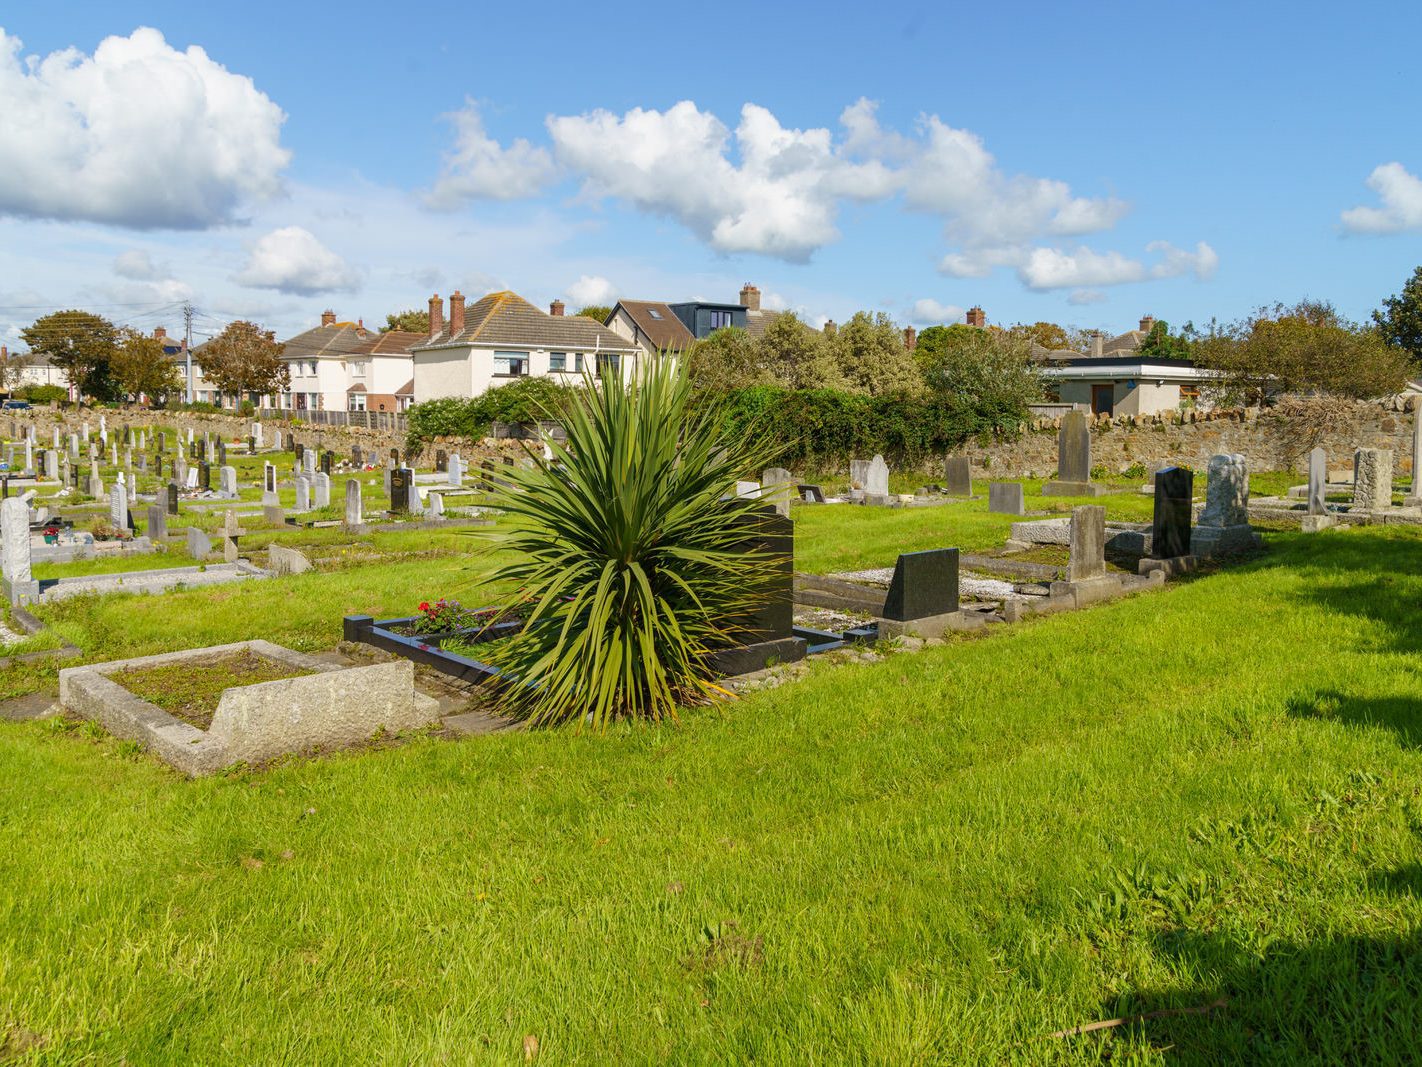 TODAY I MANAGED TO VISIT KILBARRACK CEMETERY [AFTER A NUMBER OF FAILED ATTEMPTS OVER A PERIOD OF TEN YEARS] 023